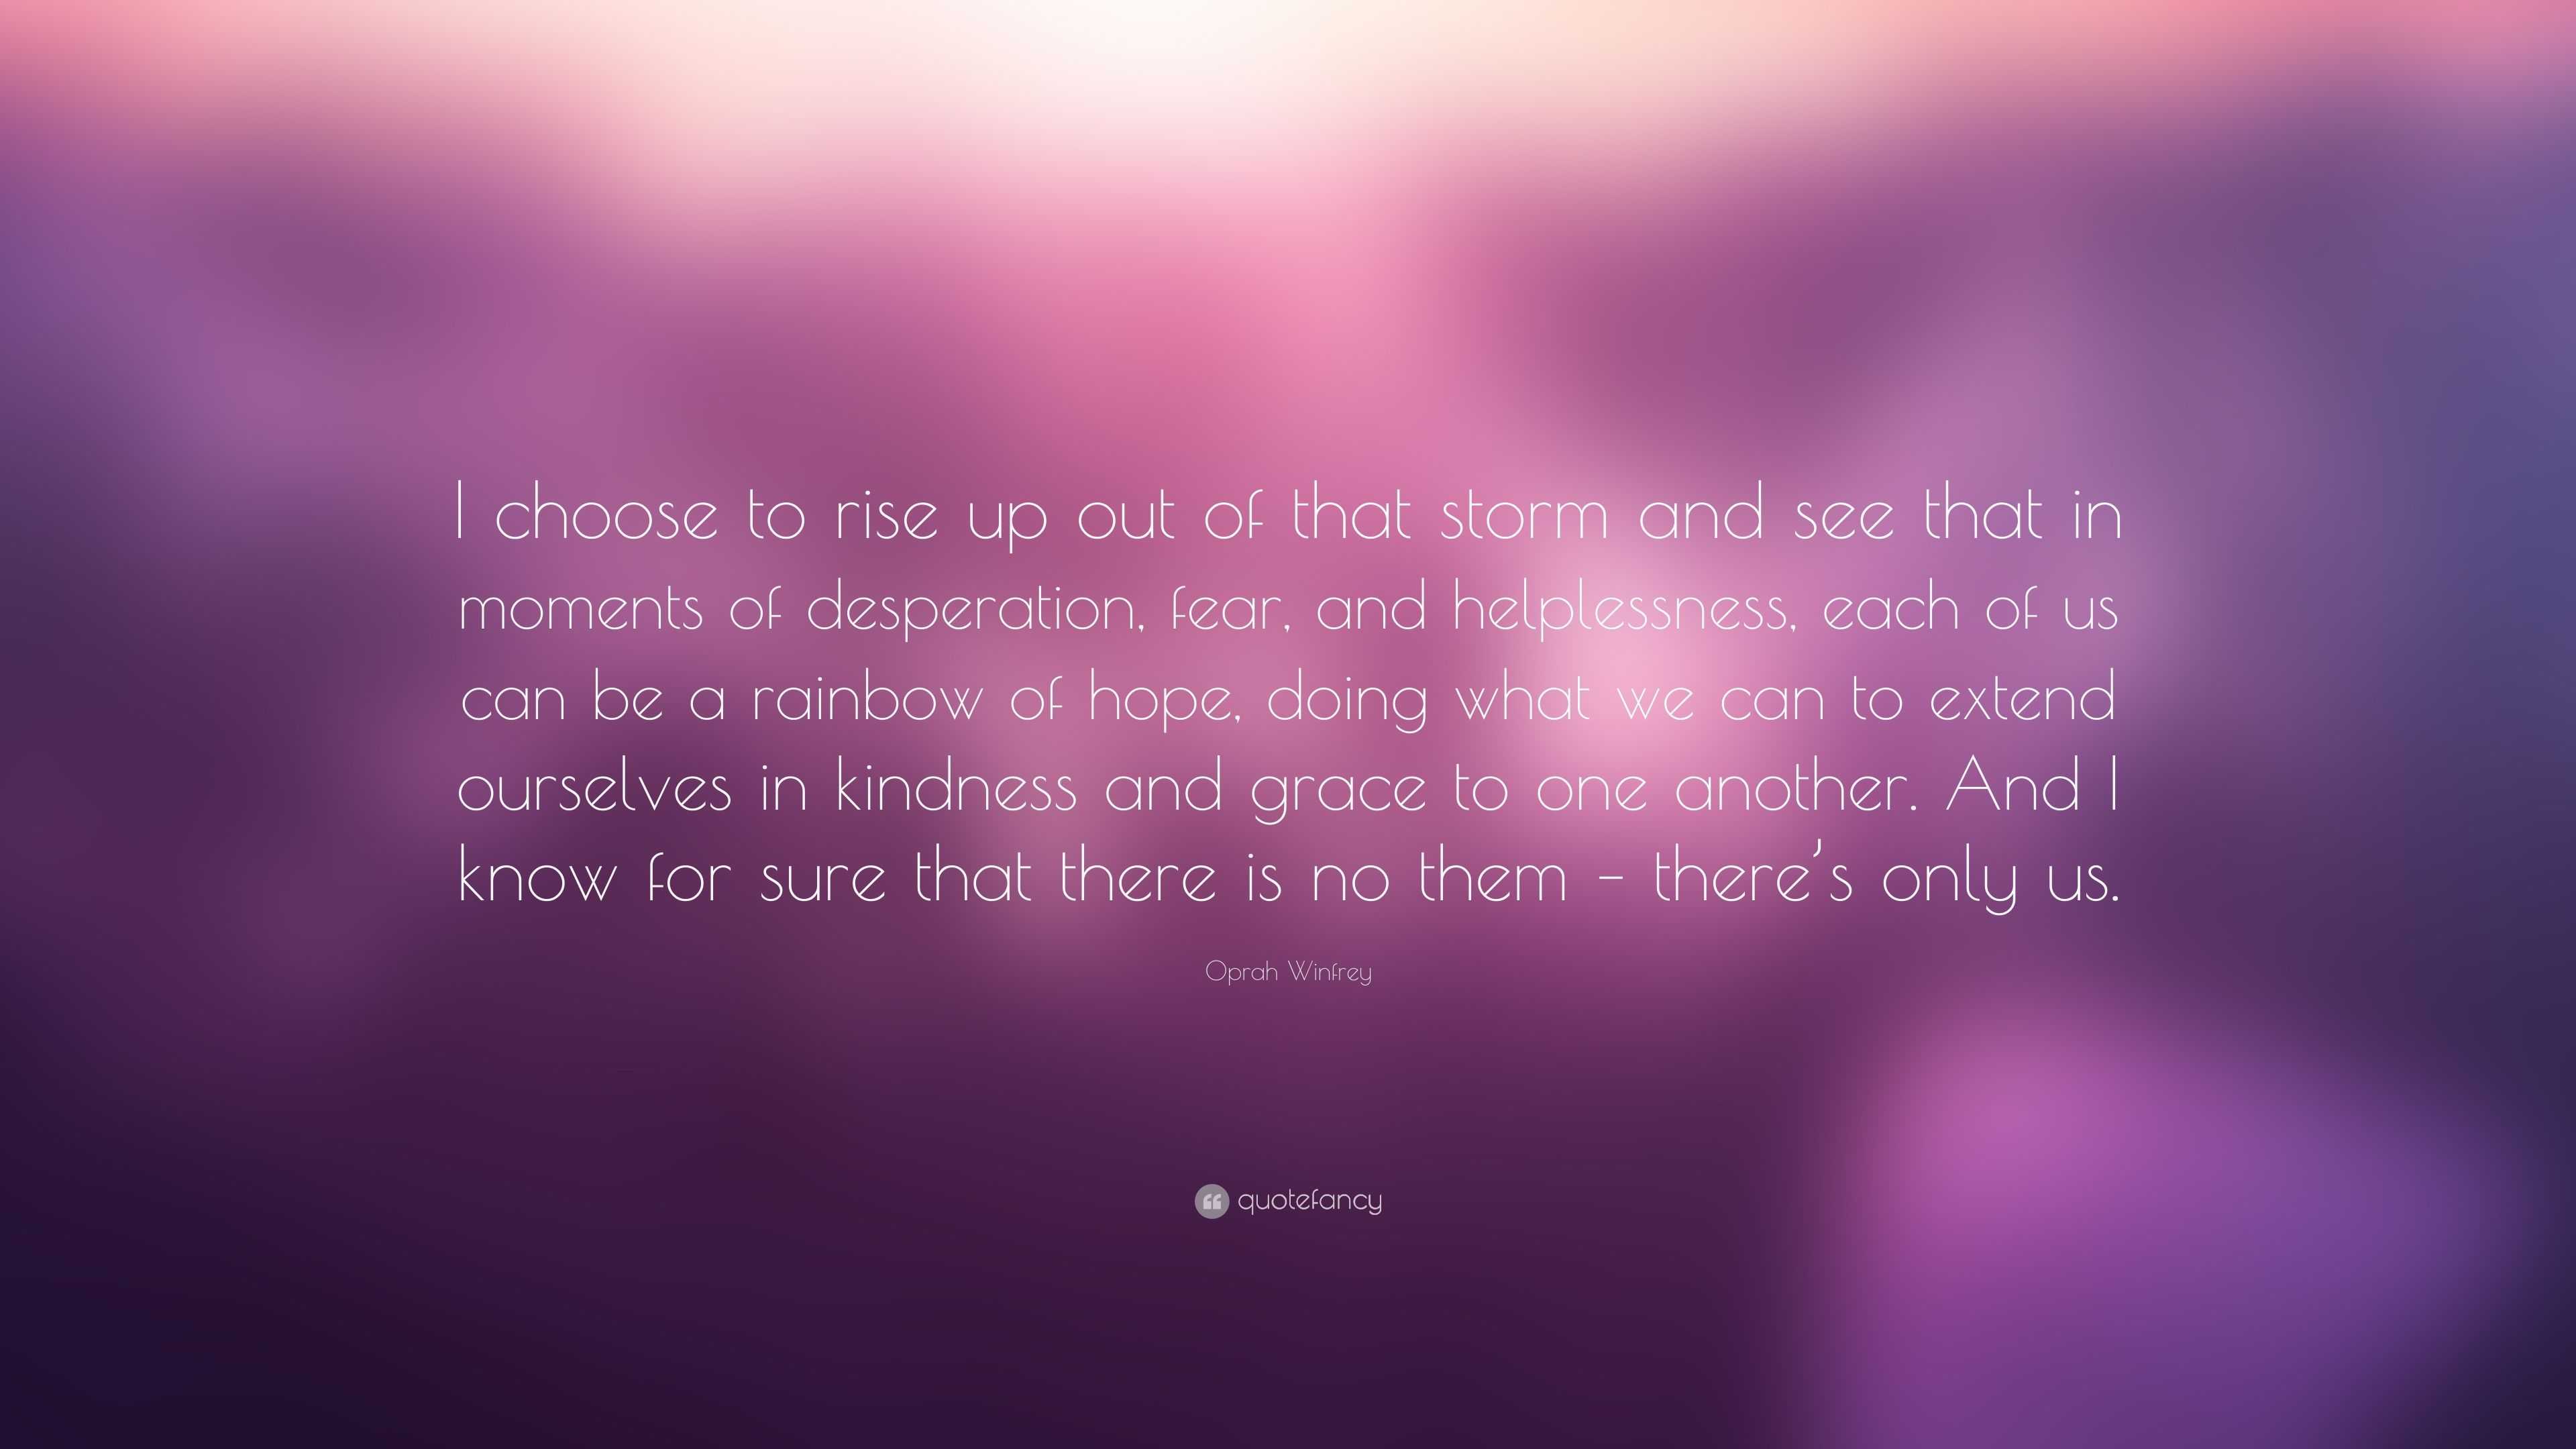 Oprah Winfrey Quote: “I choose to rise up out of that storm and see ...